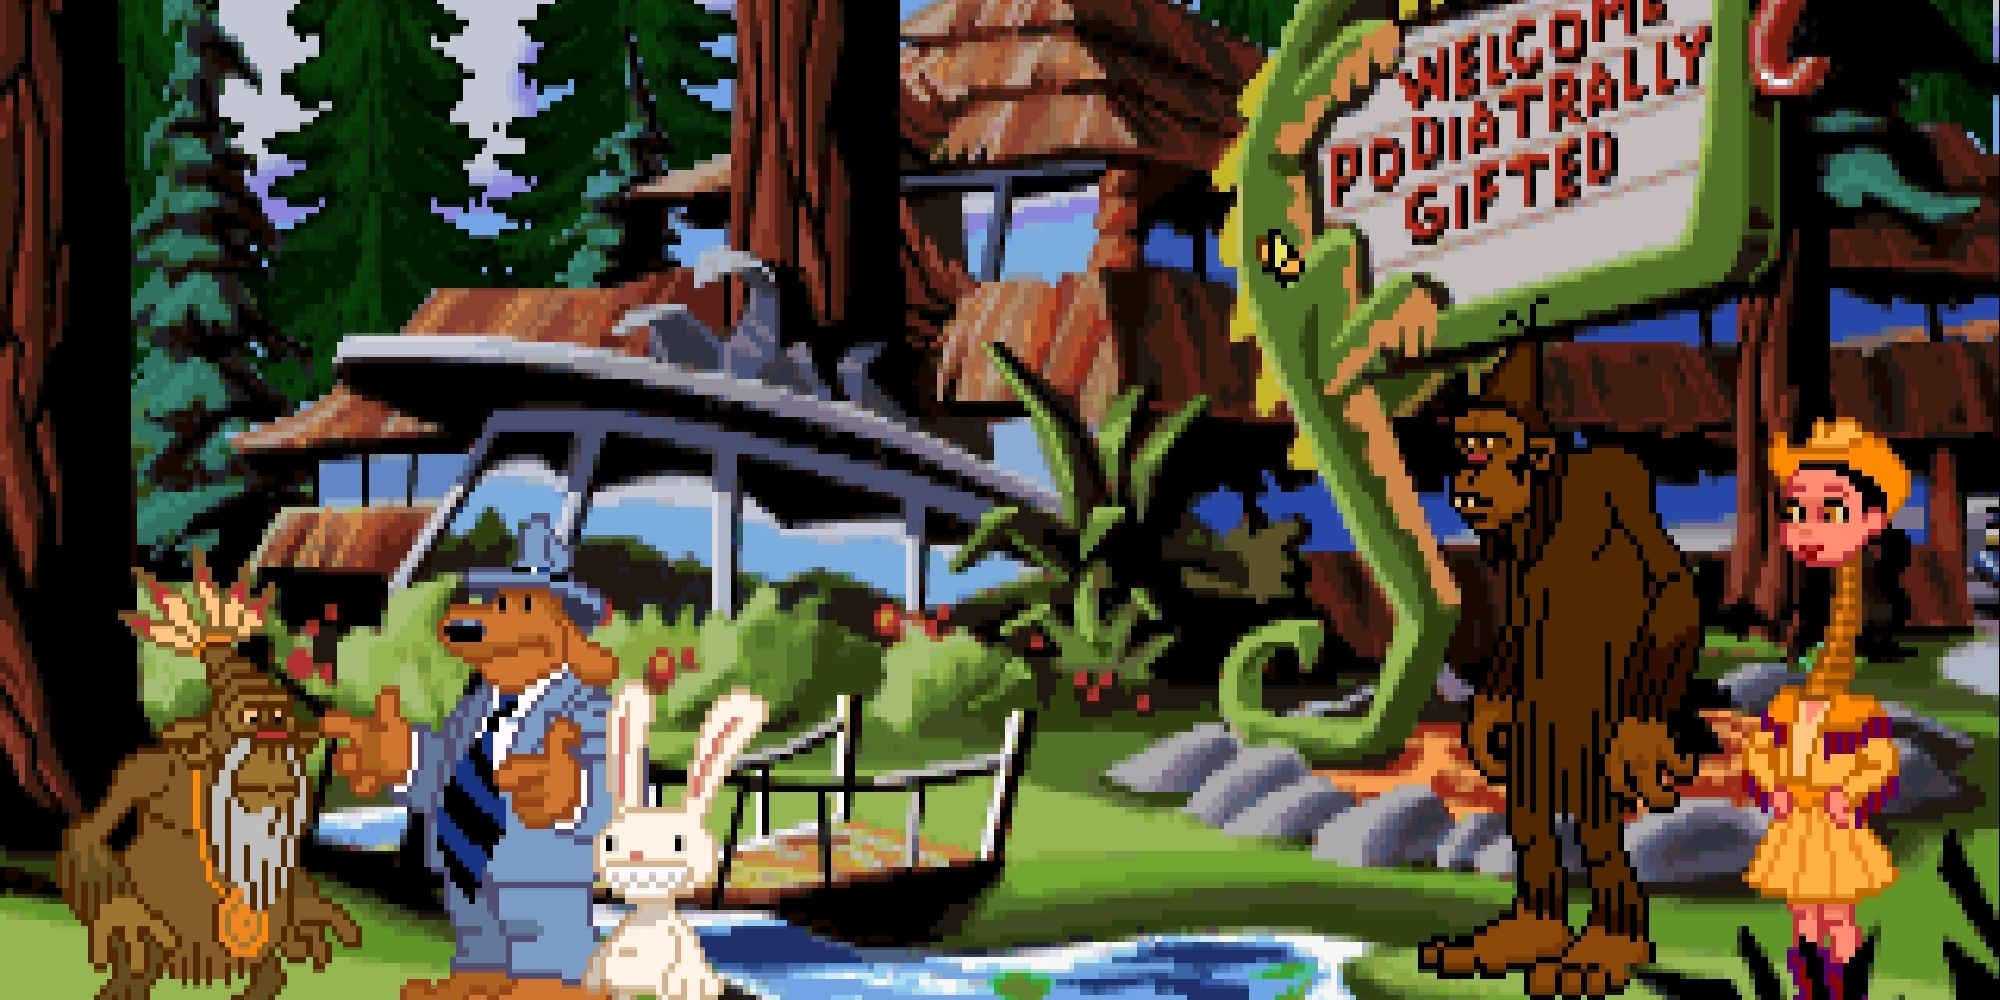 Sam and Max talking to a monkey in front of an inn